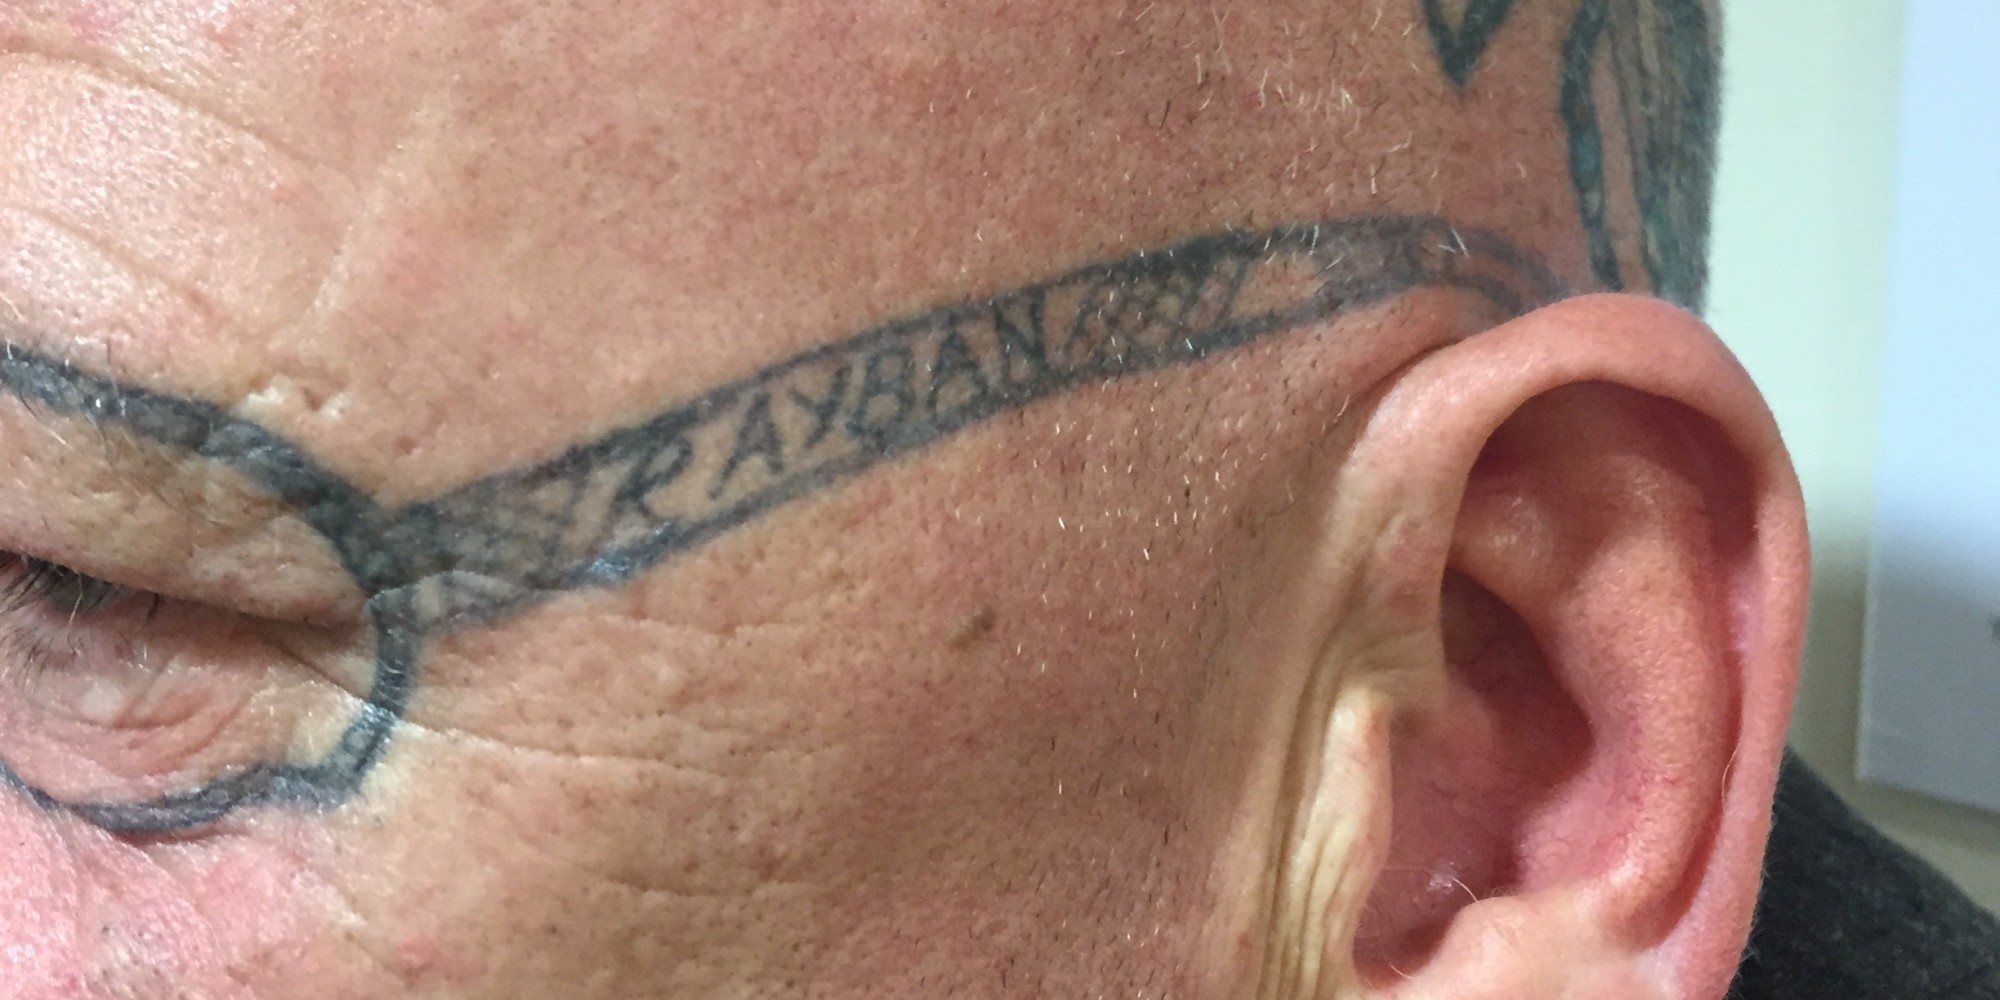 Man Wakes Up With Ray Ban Sunglasses Tattooed On His Face After 